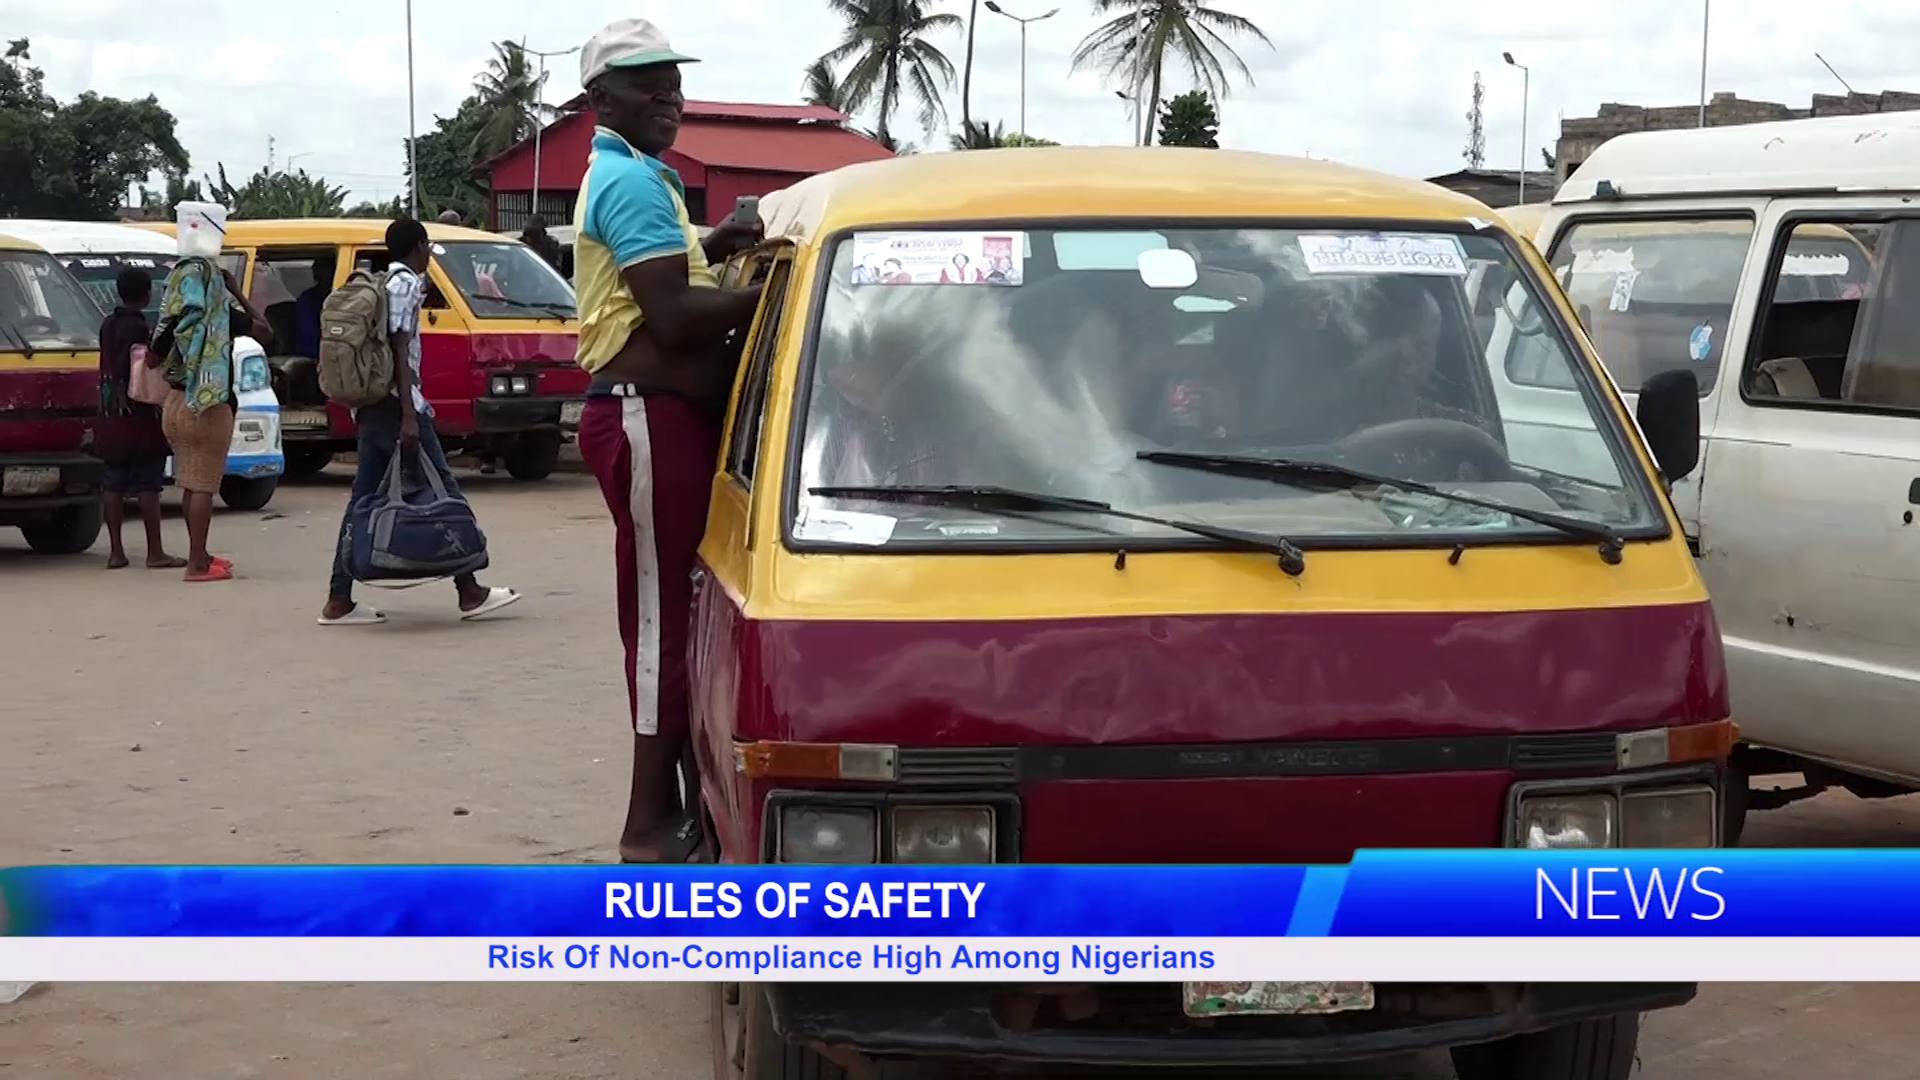 Risk Of Non-Compliance To Driving Rules Of Safety High Among Nigerians